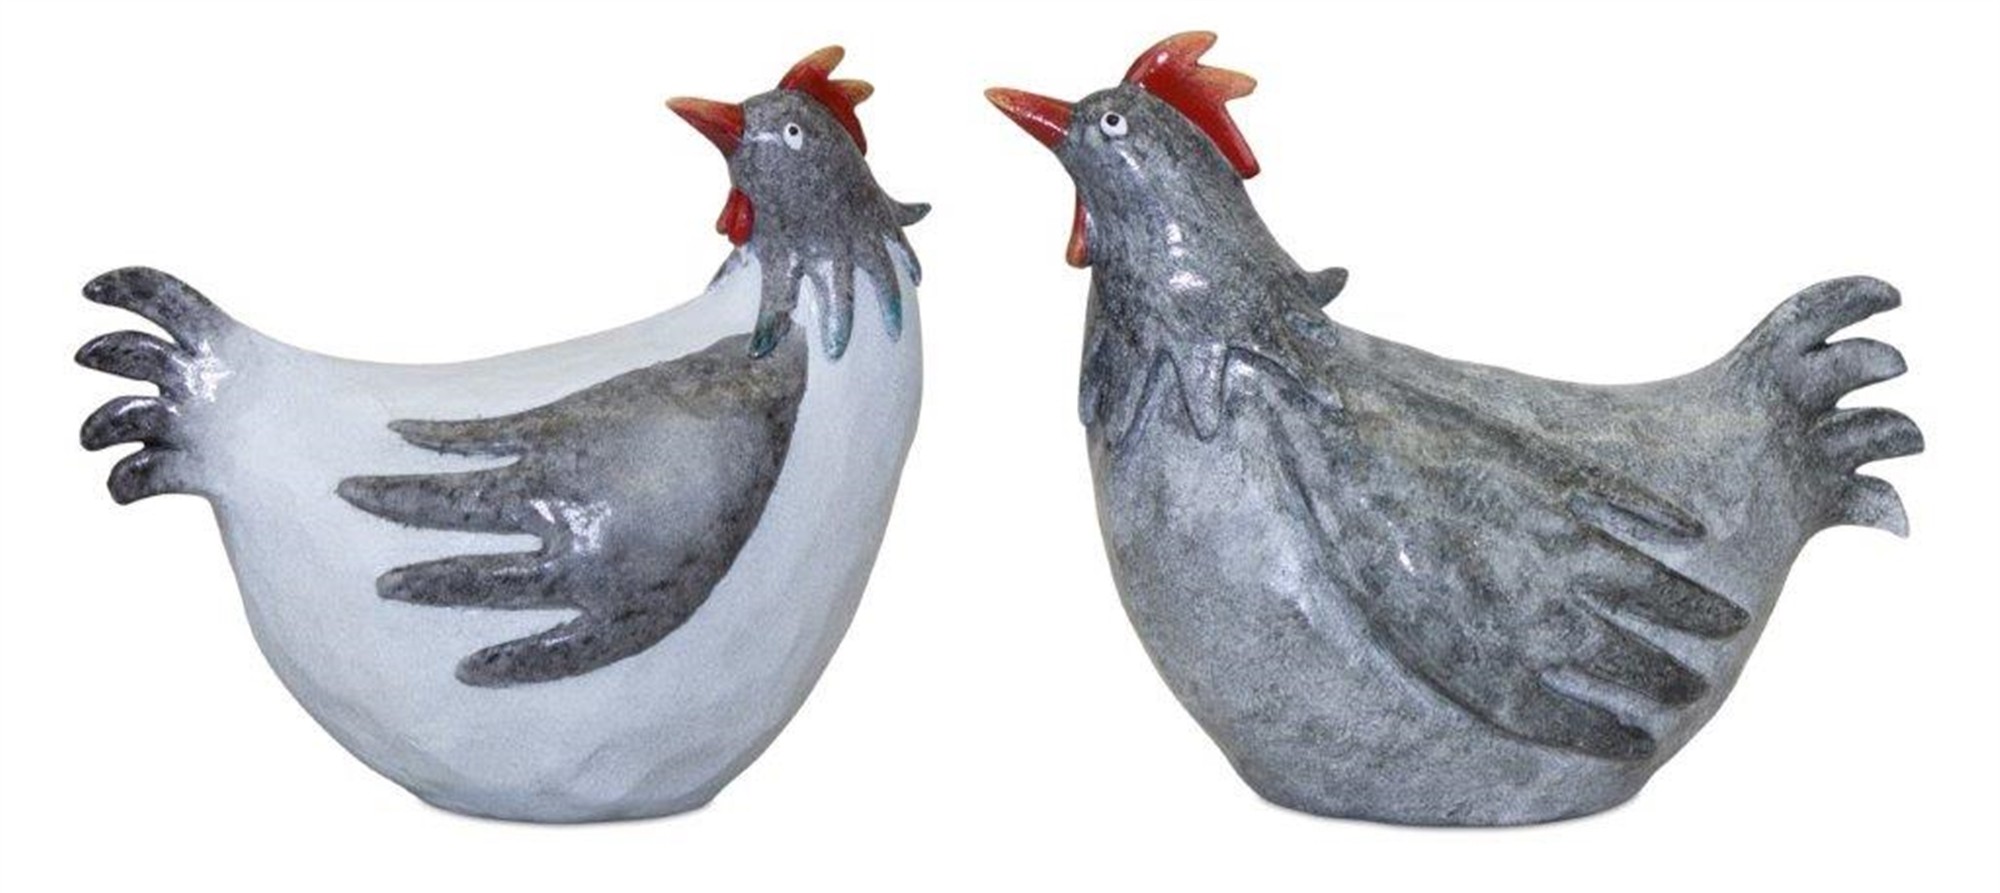 Rooster (Set of 2) 8.25"L x 4.75"H, 9.25"L x 5"H Resin